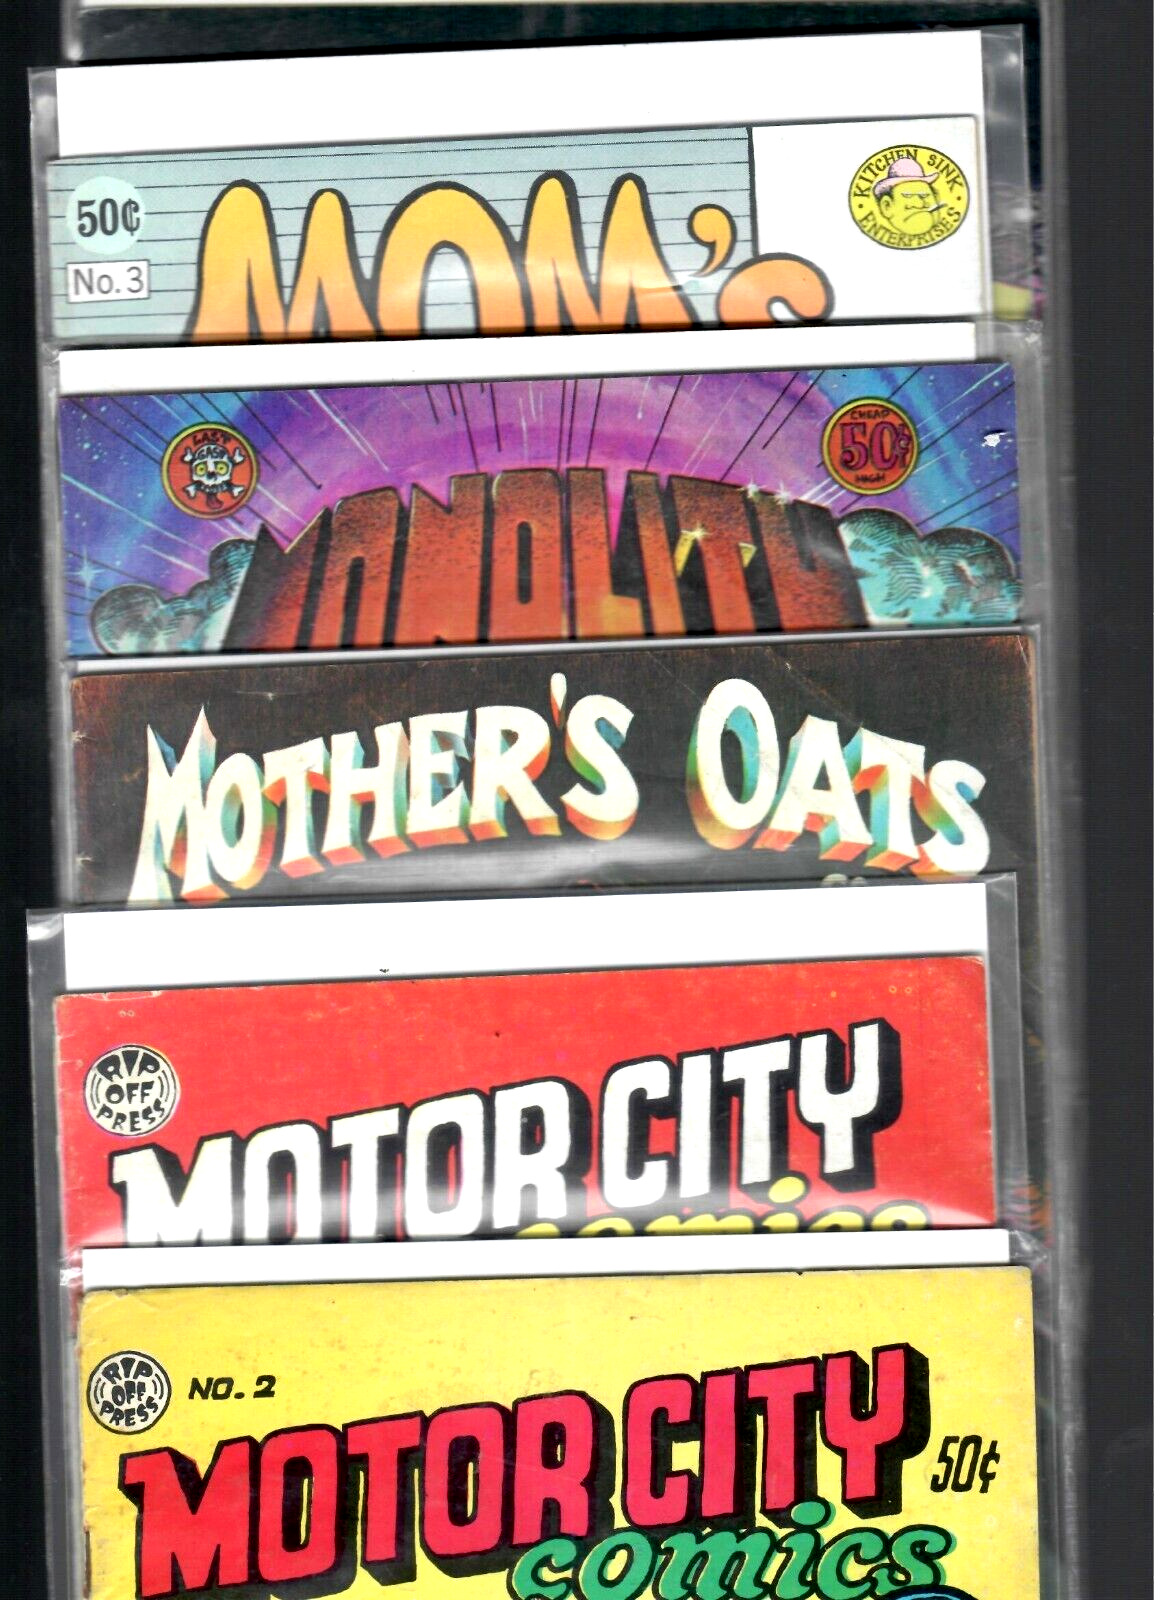 Lot of 6 Underground Comix- Motor City, Monolith, Mother's Oats. Mom's Homemade